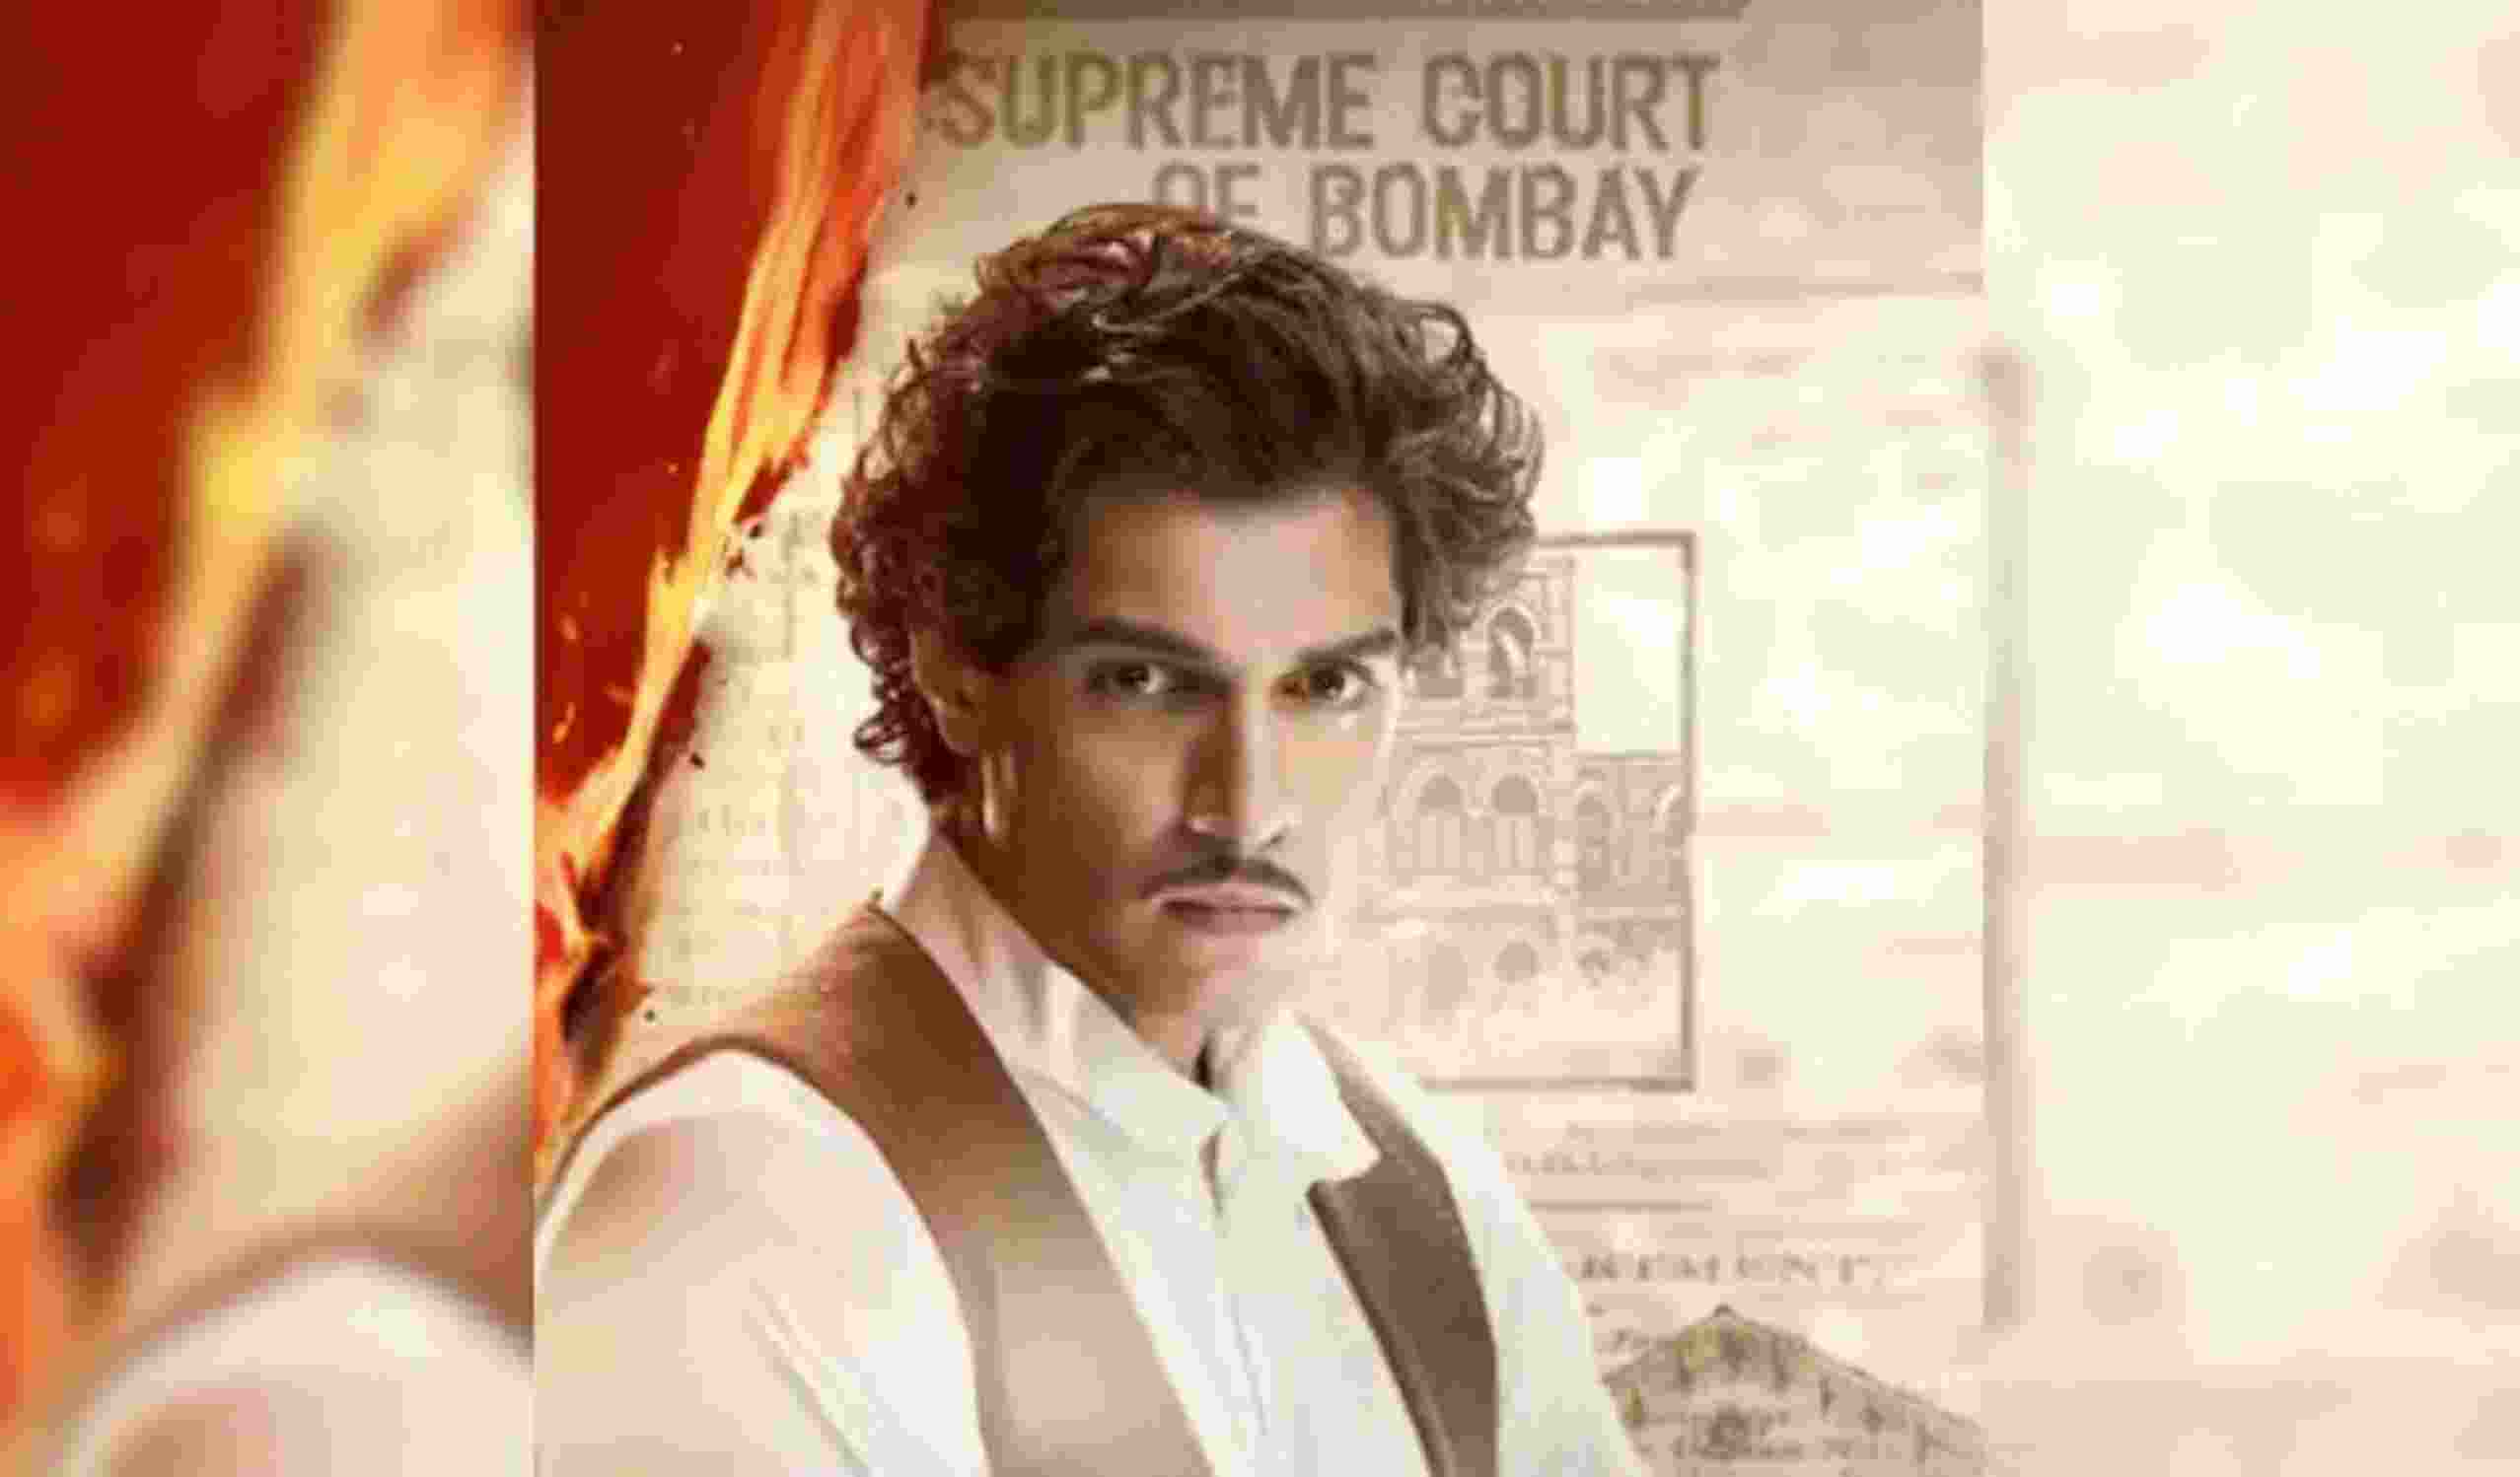 Directed by Siddharth P Malhotra and produced by Aditya Chopra, Maharaj features Junaid, son of superstar Aamir Khan and producer Reena Dutta, in the role of the real-life 19th century social reformer Karsandas Mulji.